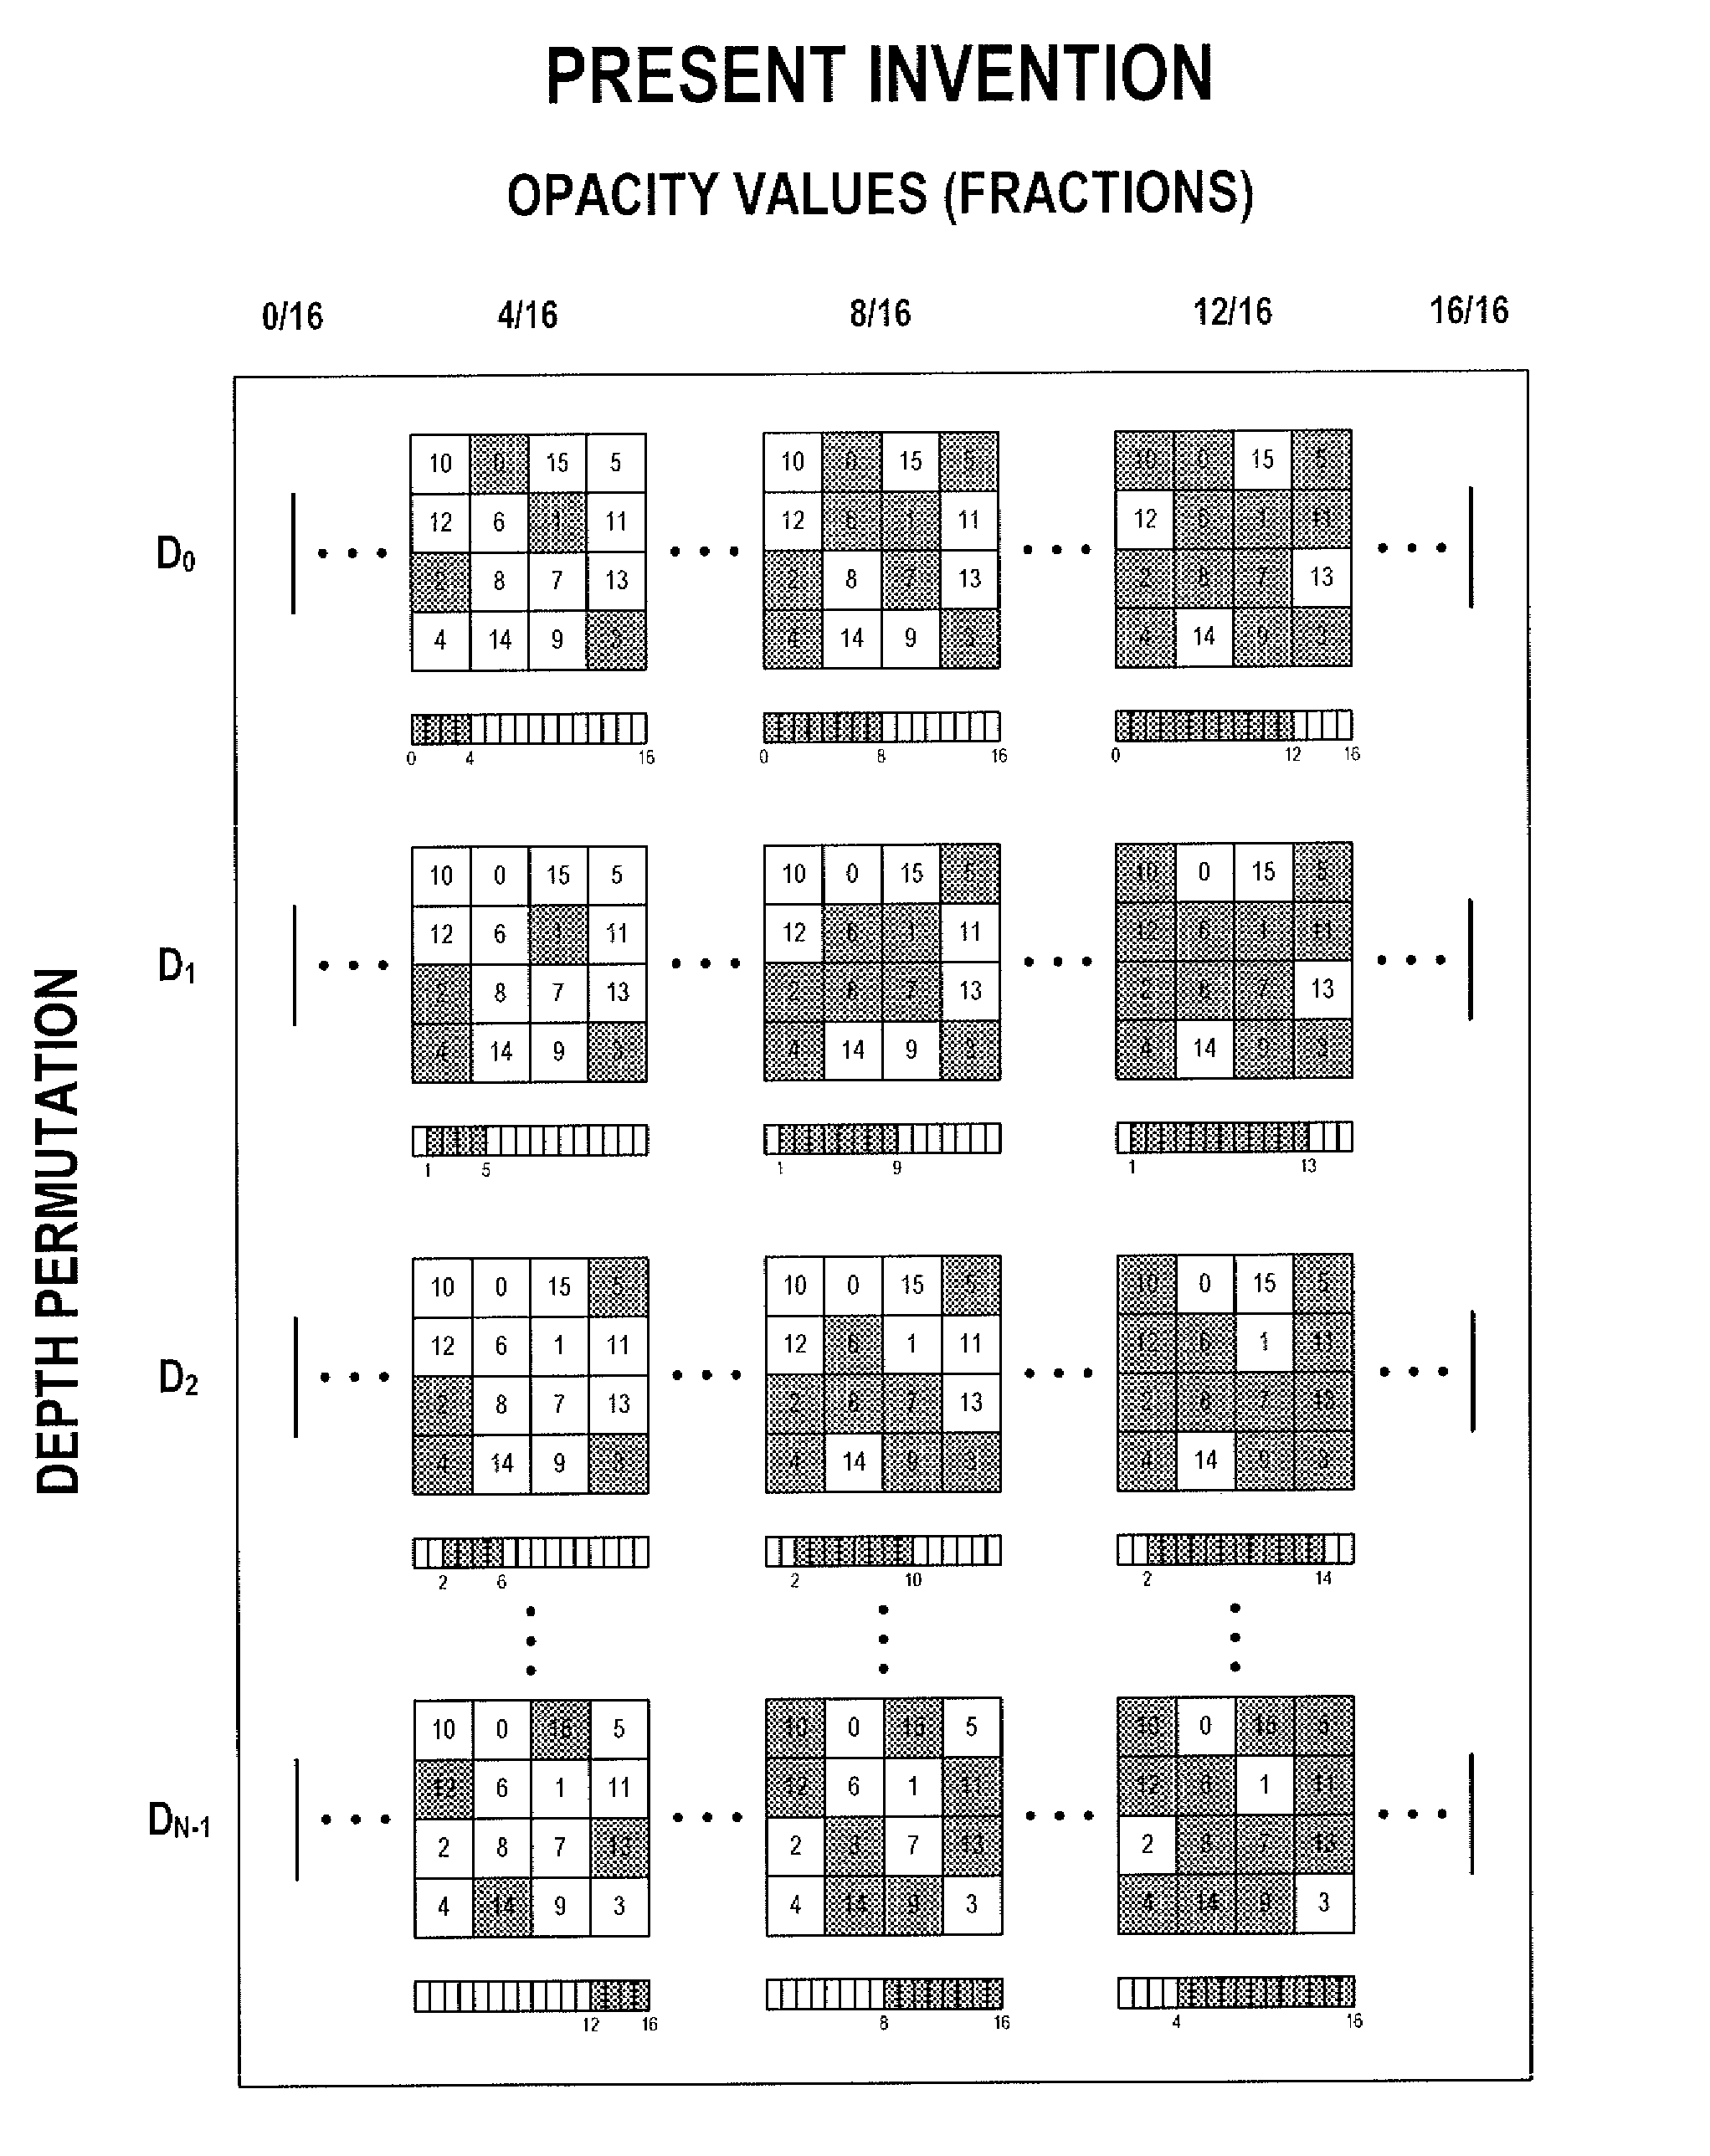 Single-pass and order-independent transparency in computer graphics using constant memory